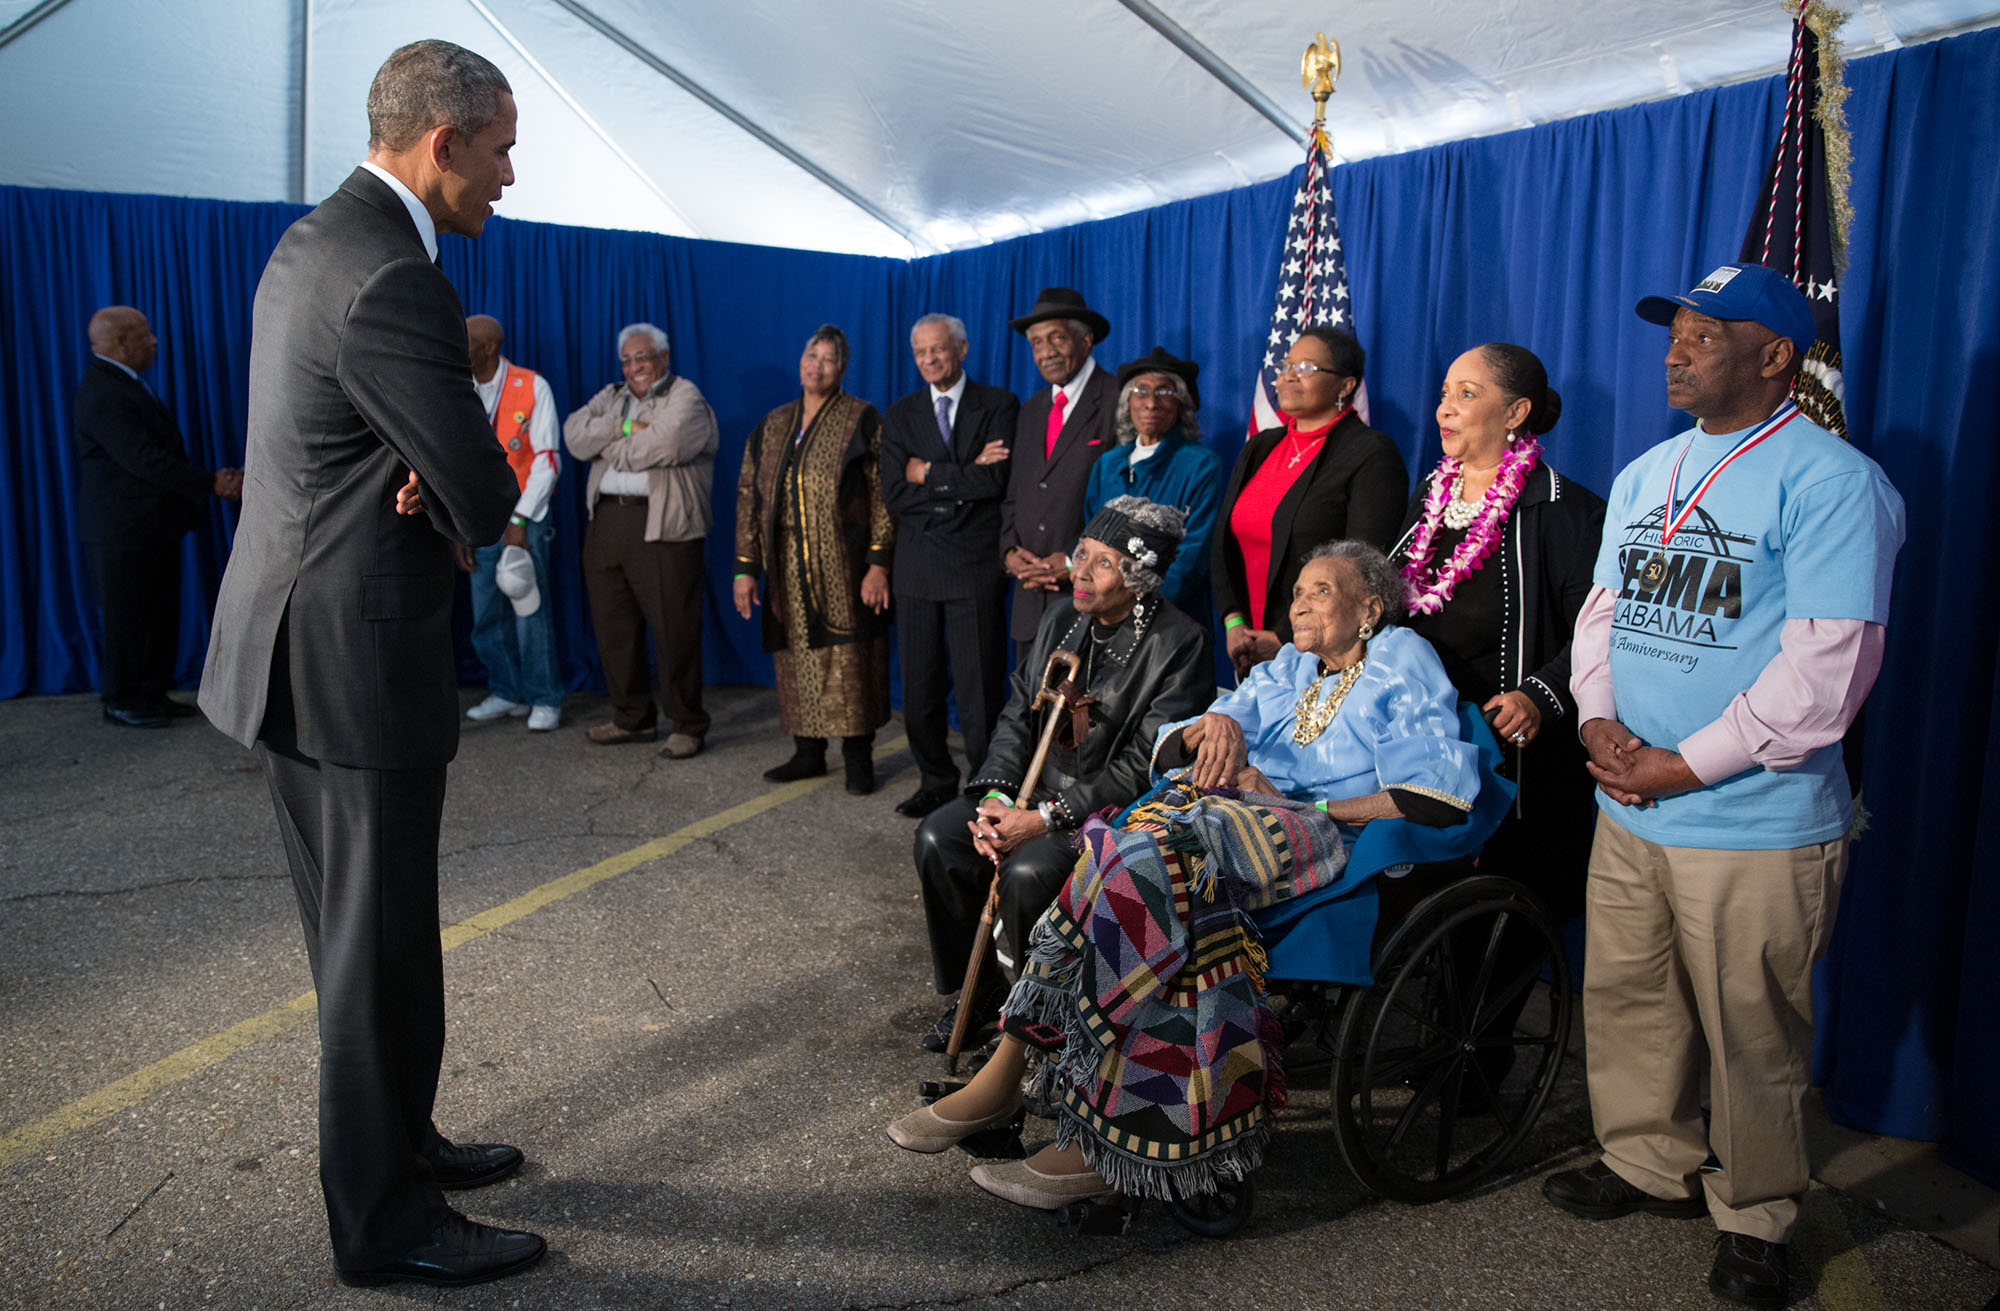 The President speaks to the foot soldiers who attended the 50th anniversary event. (Official White House Photo by Pete Souza)